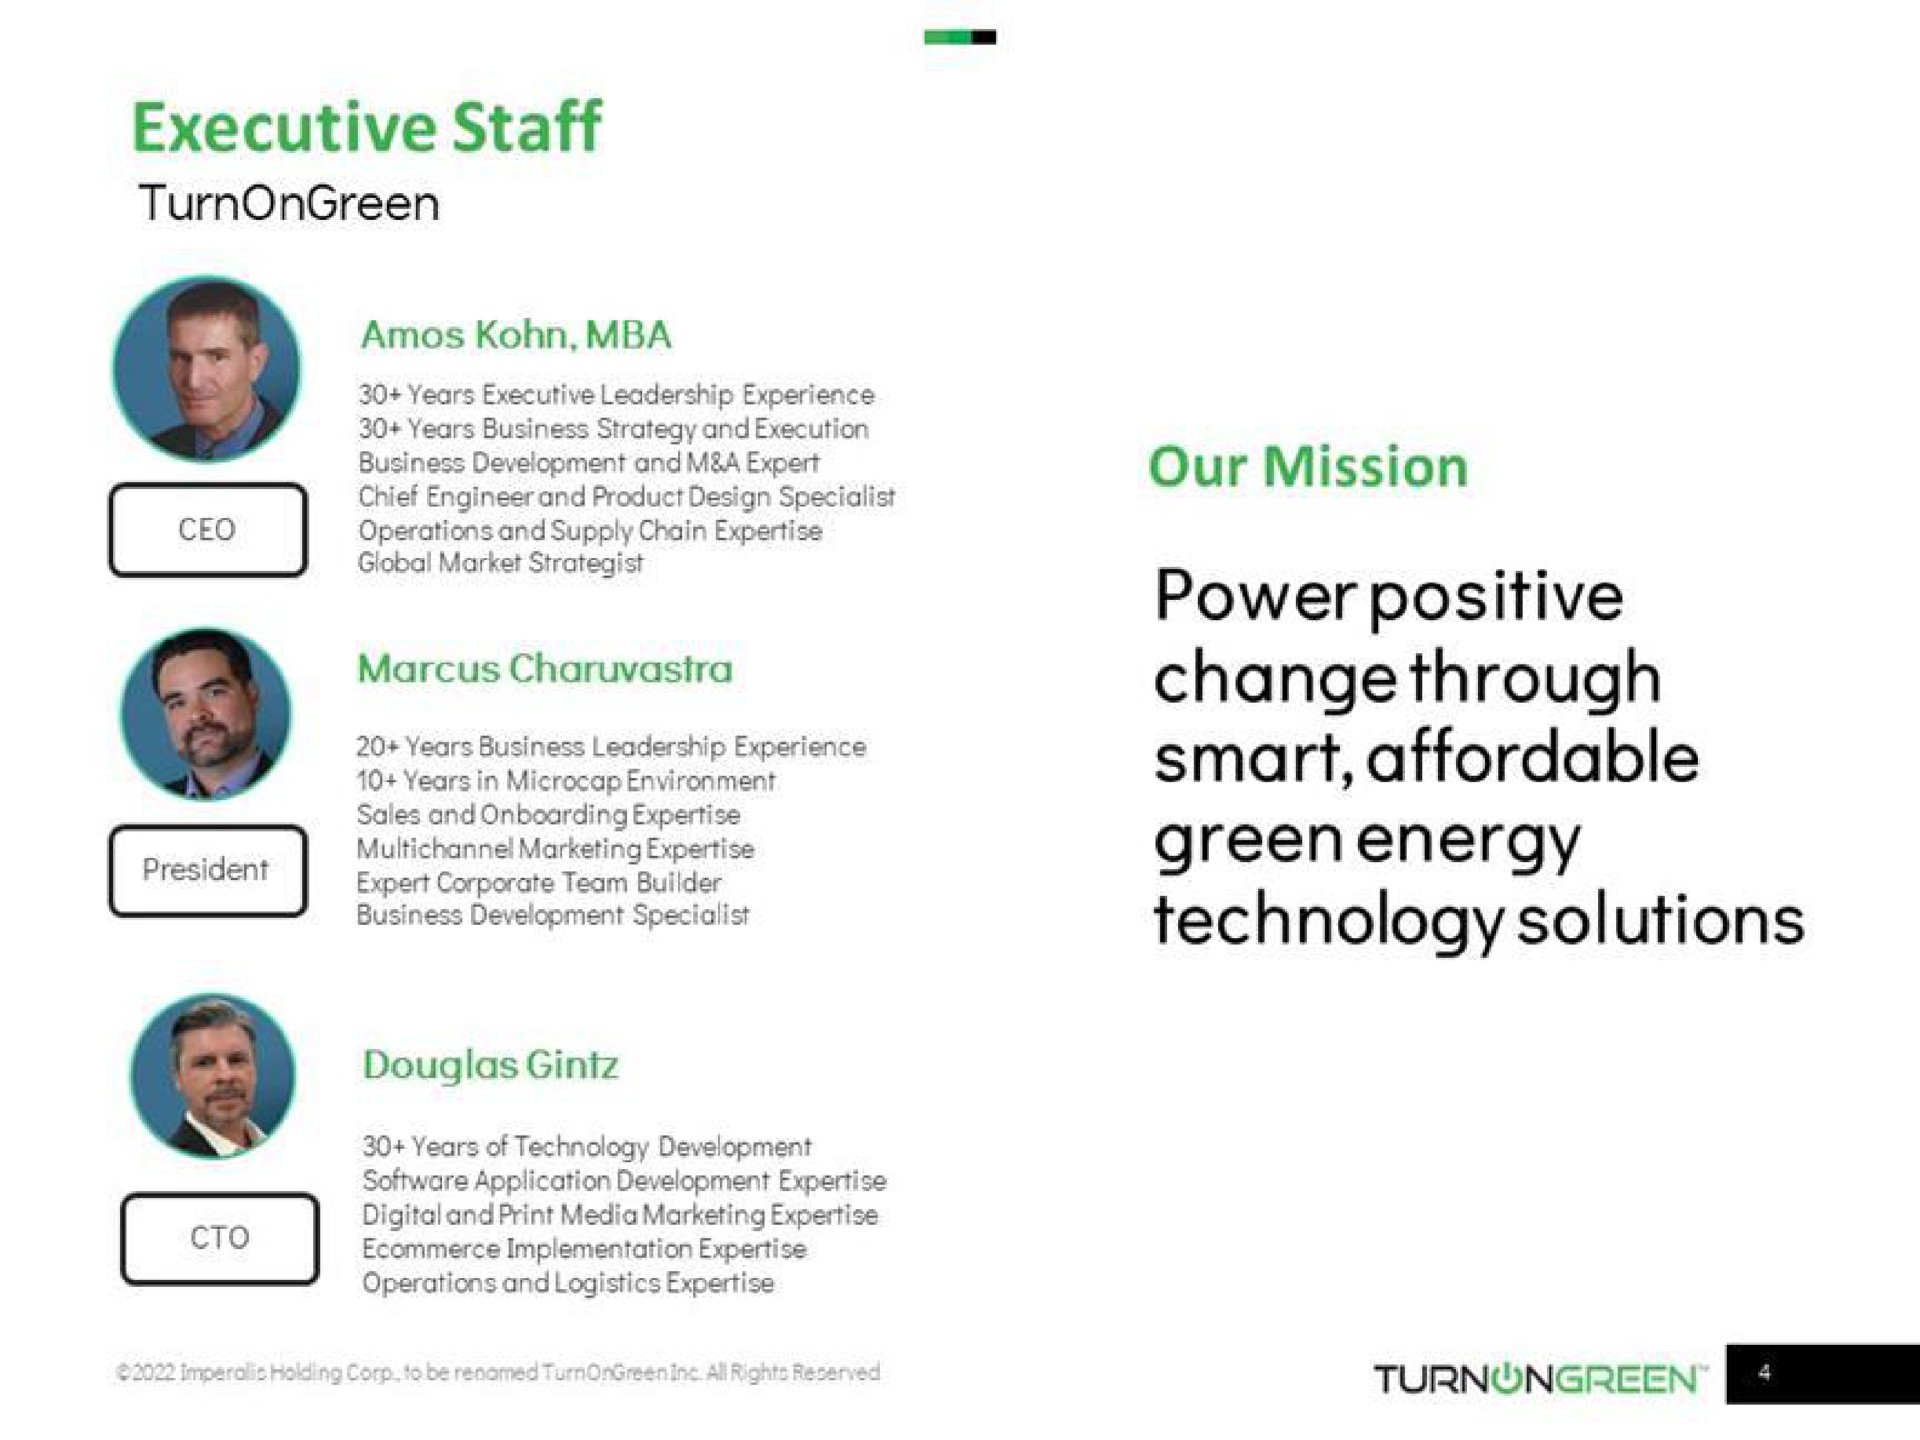 executive staff power positive change through smart affordable green energy technology solutions | TurnOnGreen